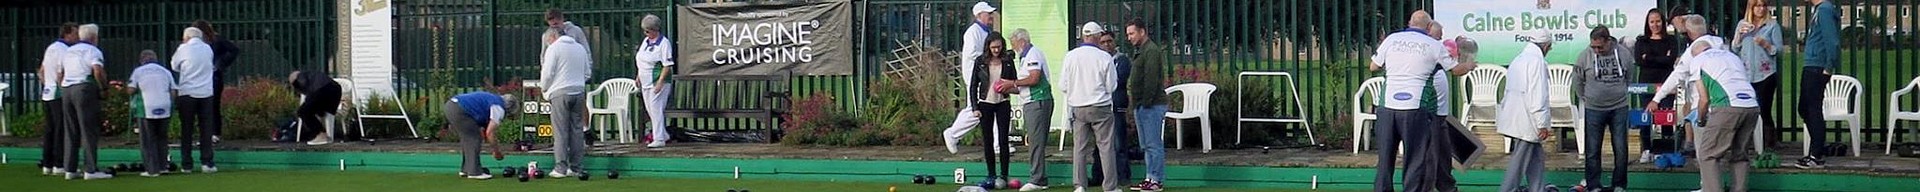 Calne Bowls Club Public Open Days – 22nd and 30th May 2021